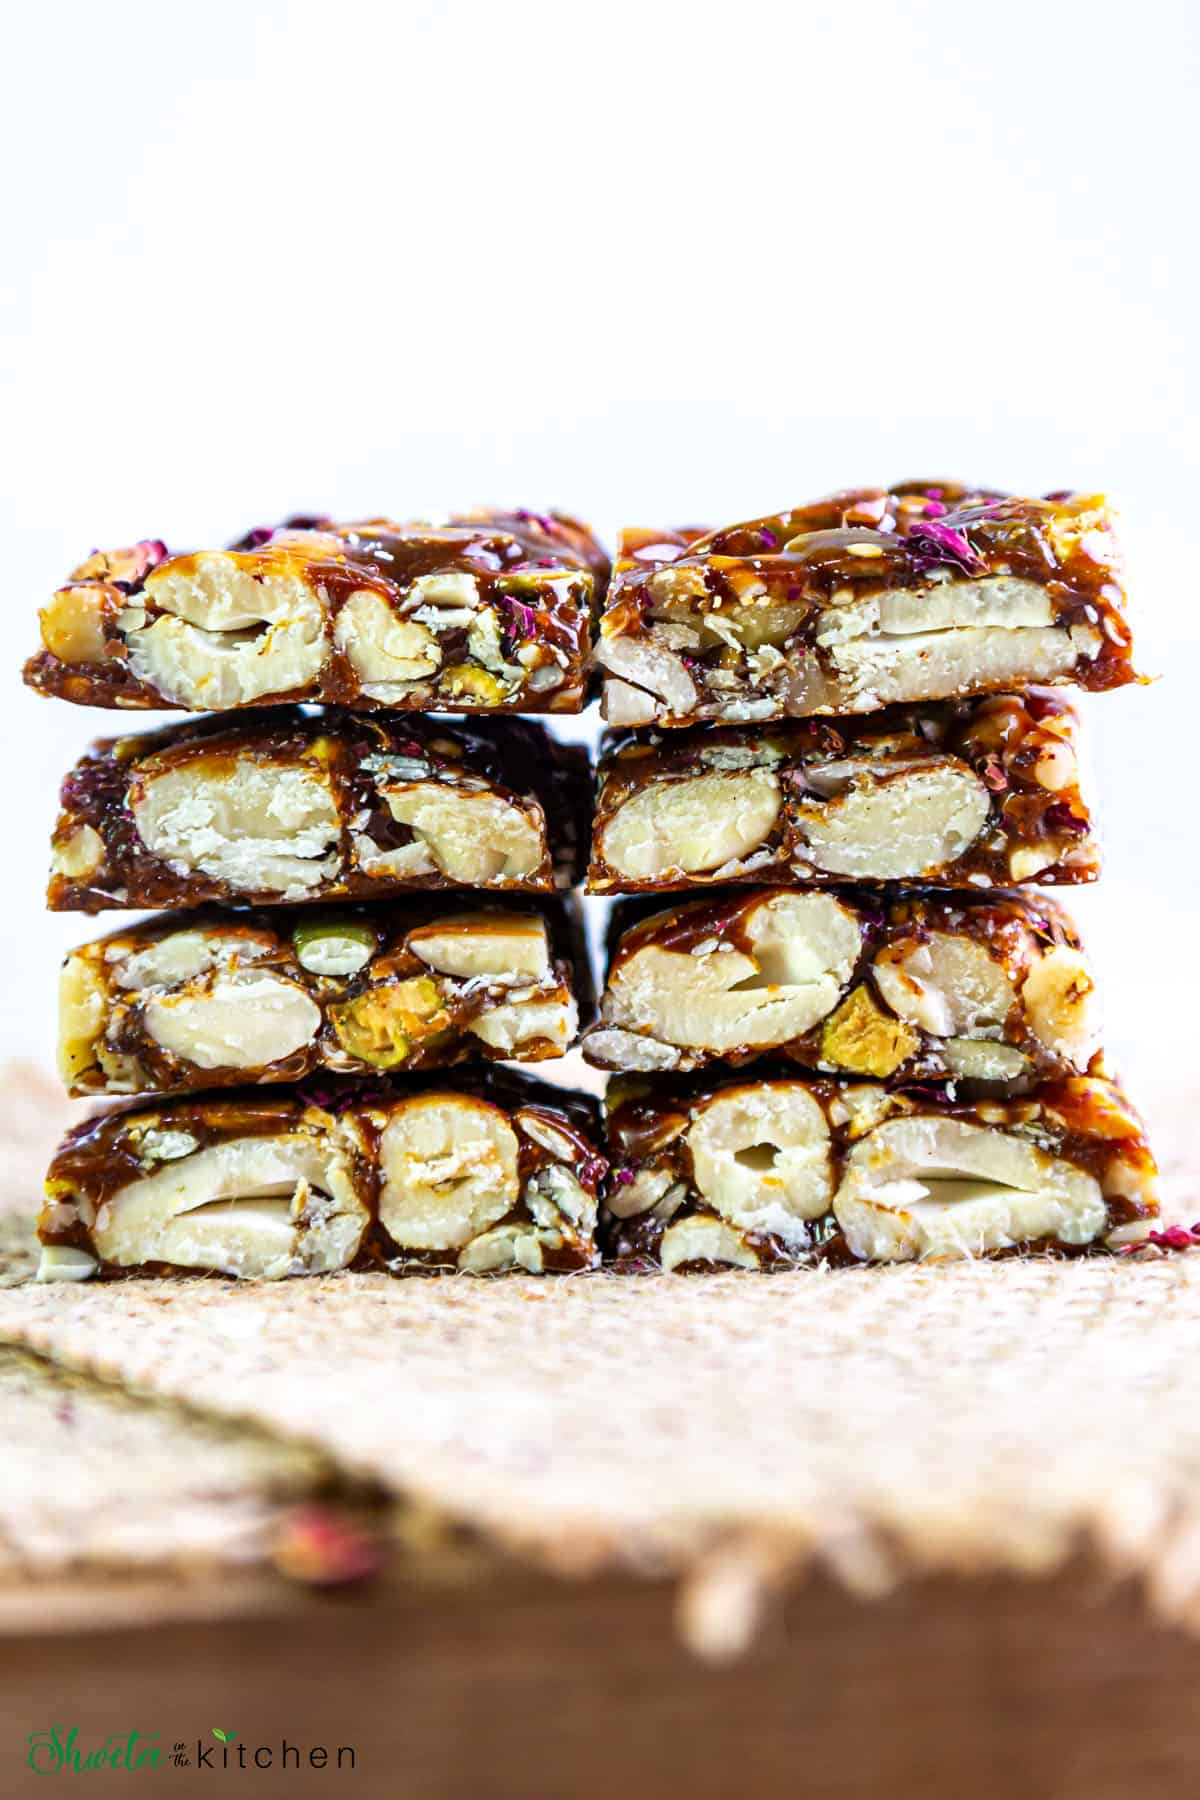 Cut sectional view of dry fruit chikki